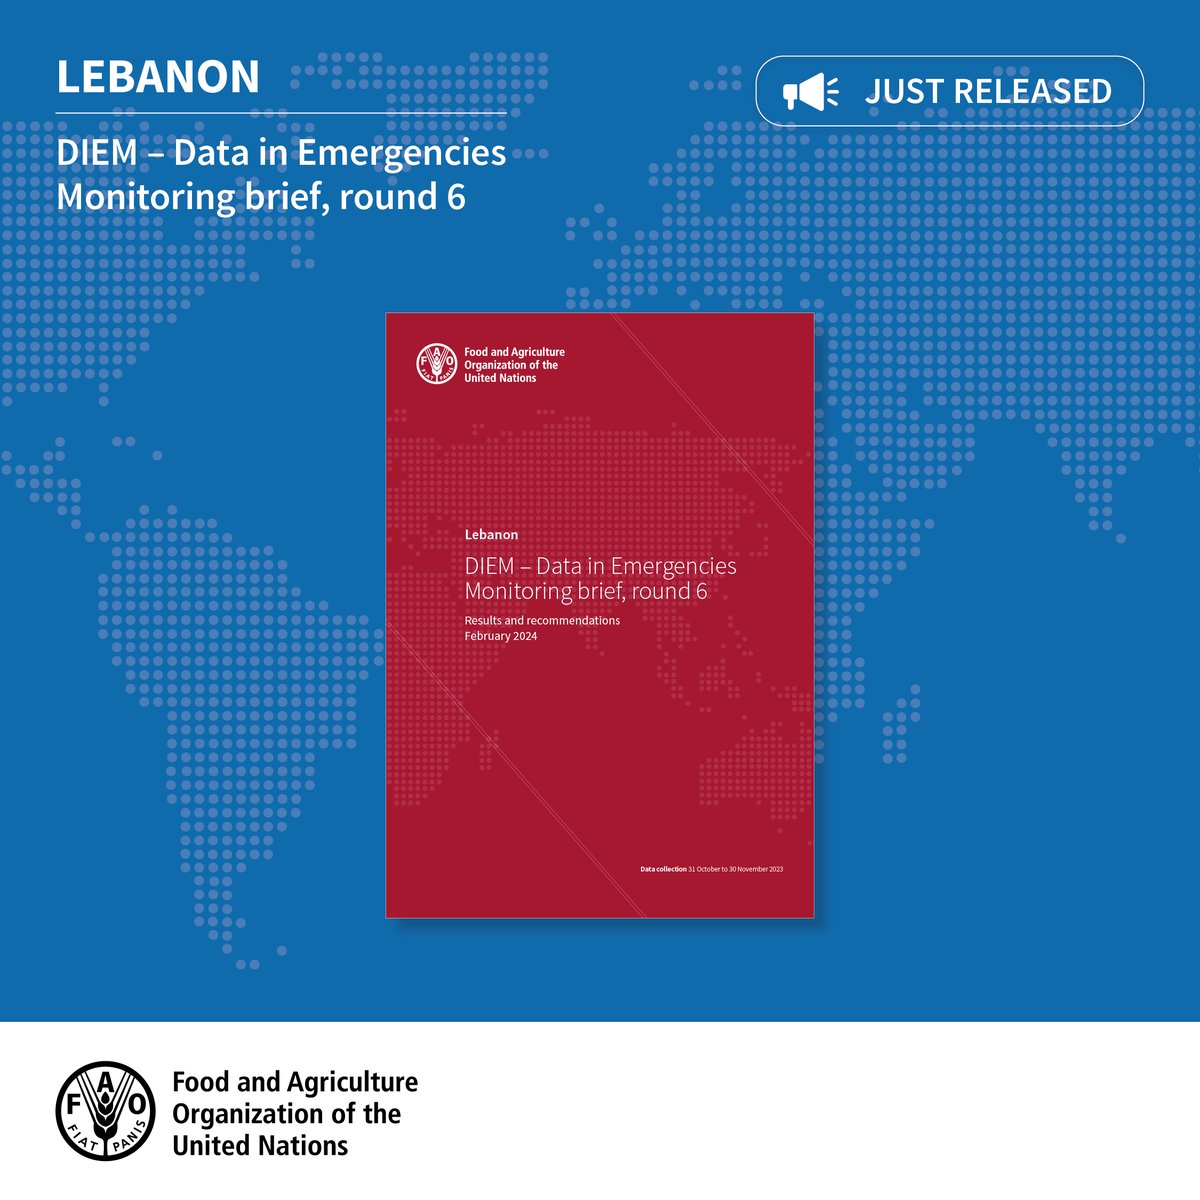 Discover key findings and recommendations for humanitarian actors to utilize when planning and implementing data-driven programming to sustain livelihoods in #Lebanon.

Check out the new #DataInEmergencies monitoring brief for the sixth round 👉bit.ly/483yxUf